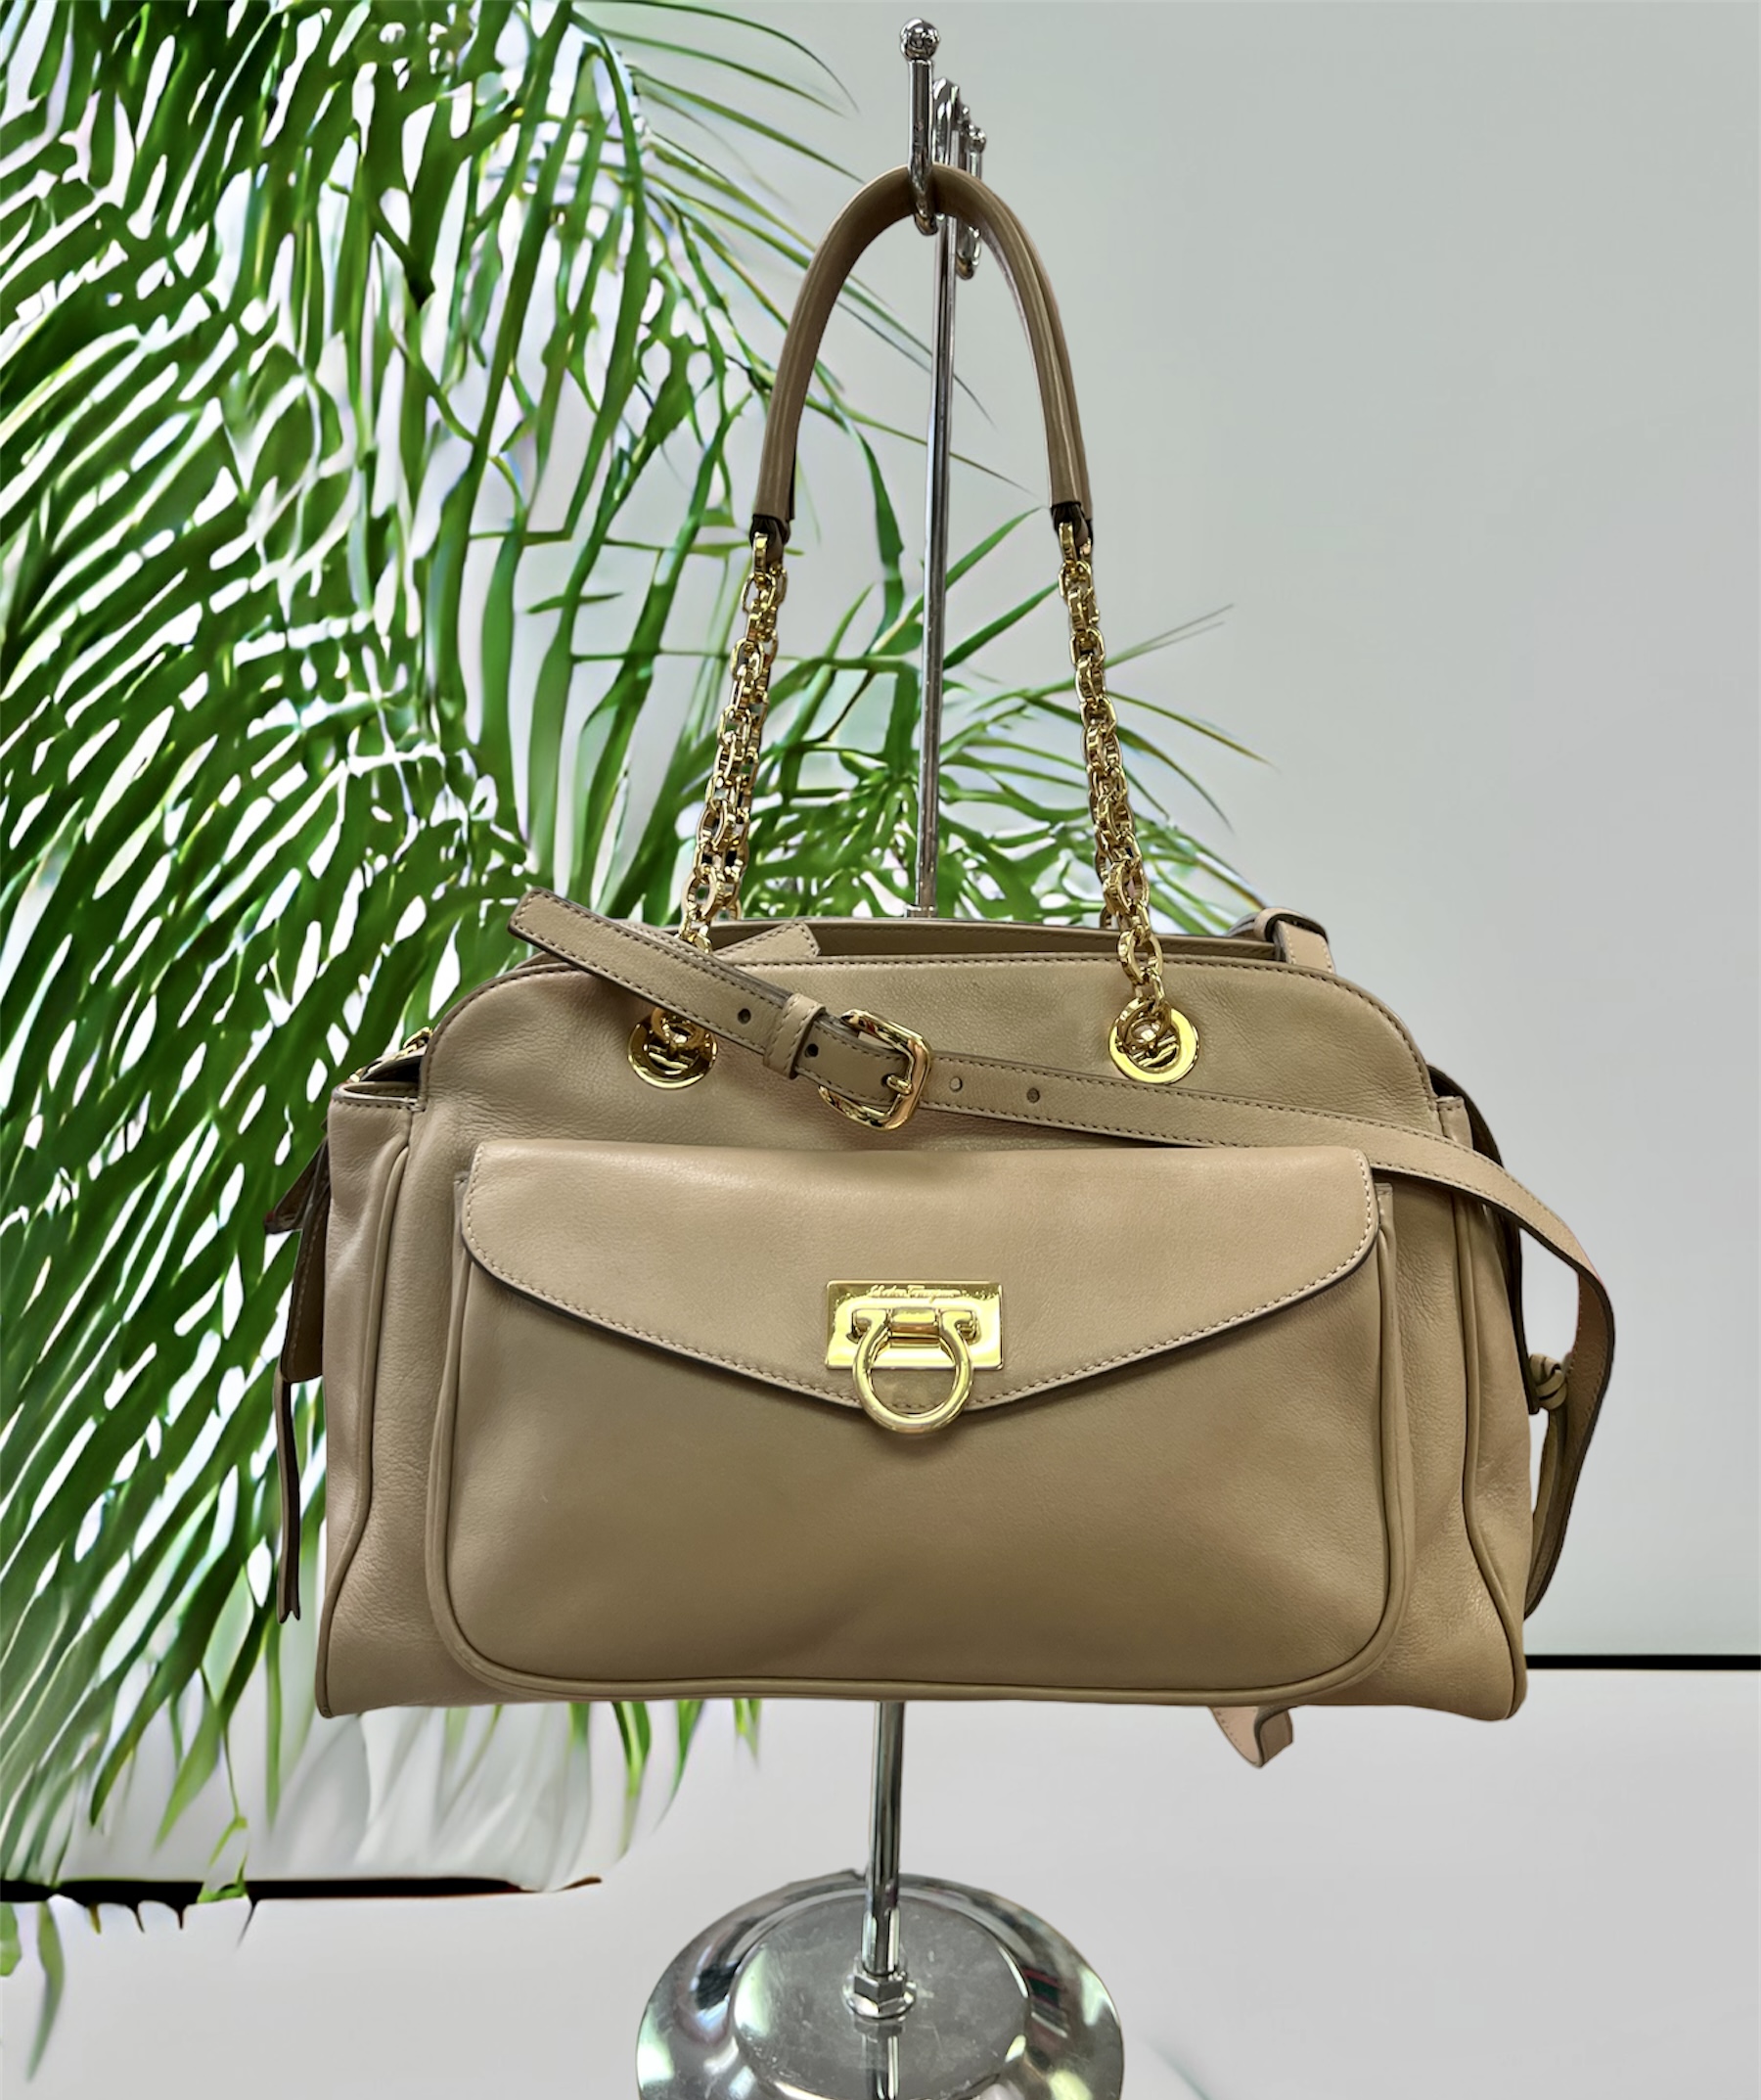 FERRAGAMO
Gancini Pocket Chain Bowler Bag Leather Medium

Designer: Salvatore Ferragamo
Dimensions: Height: 9.5 in (24.13 cm)Width: 13 in (33.02 cm)Depth: 5 in (12.7 cm)
Period: 21st Century
Material Notes:
Exterior Material: Leather Exterior Color: Beige
Interior Material: Fabric Interior Color: Beige
COMES WITH CERTIFICATE OF AUTHENTICITY

About the Designer:
Salvatore Ferragamo Clothing
A perfectionist who as a child crafted a pair of white shoes for his sister’s first holy communion because his parents couldn’t afford new footwear, Salvatore Ferragamo was ambitious from his earliest days. The young Italian shoemaker established in the years that followed what would one day become a fashion empire — the highly profitable multinational family-owned and -operated luxury brand today counts more than 600 stores in 96 countries around the world, and vintage Salvatore Ferragamo shoes, belts, handbags and other clothing and accessories are objects of desire for fashion lovers everywhere.

Salvatore Ferragamo sought an education in the art of shoemaking when he was eleven — he apprenticed with a local shoemaker and spent a short time in nearby Naples learning what he could at a shoe factory. He opened his first shop with a handful of workers the following year, and in 1914 — when he was still a teenager — Ferragamo emigrated to America, just as his siblings had before him, seeking new opportunities for work and to learn in the footwear trade.

After securing a job at the Plant Shoe Factory in Boston, Massachusetts, Ferragamo was uninspired by machine-made footwear. He moved across the country to Santa Barbara, California. Owing to a connection he made with a then-actor cousin, Ferragamo found work with the American Film Manufacturing Company. He made women’s shoes and provided durable cowboy boots for a film crew’s costuming department. Ferragamo’s reputation in the world of Hollywood cinema soon broadened, and he established a storefront in Mission Canyon where he made shoes by hand for the likes of actresses Gloria Swanson, Greta Garbo and Dolores del Río.

By the 1920s, film directors commissioned Ferragamo to produce shoes for a range of movies — the list of films eventually included The Ten Commandments, The Covered Wagon and The Thief of Baghdad. When he felt comfortable enough with the English language, Ferragamo also enrolled in anatomy courses at the University of Southern California in Los Angeles in order to better understand motion and the demands that we place on our footwear.

By the late 1920s, Ferragamo sought to expand production of his shoes and returned to Italy. He hired scores of apprentices to work in a factory in Florence, where Ferragamo carefully melded the principles of handcraftsmanship with all that he learned about America’s shoe factories. He filed patents — hundreds over the years — on the steel shank arch and many other unique aspects of his shoe design, and when economic and political influences during the 1930s forced Ferragamo to substitute pressed cork for steel to support the arch, the wedge heel was born. Other creative materials he integrated into his forward-looking creations were hemp, felt, nylon fishing line, fish skin and cellophane twisted with silk.

In the late 1940s, the brand’s first storefront opened in Manhattan, and today Salvatore Ferragamo is known worldwide and is synonymous with a wealth of iconic footwear such as Viva ballet flats, Vara Bow pumps, Gancini loafers and lots more. Ferragamo’s son, Ferruccio, was appointed CEO in 1984. Under his leadership, Ferruccio diversified and expanded the fashion business further, getting into sunglasses, fragrance, watches and made-to-measure men’s shoes. Ferruccio was succeeded by his brother, Leonardo Ferragamo, and British designer Maximilian Davis is now creative director of the brand.